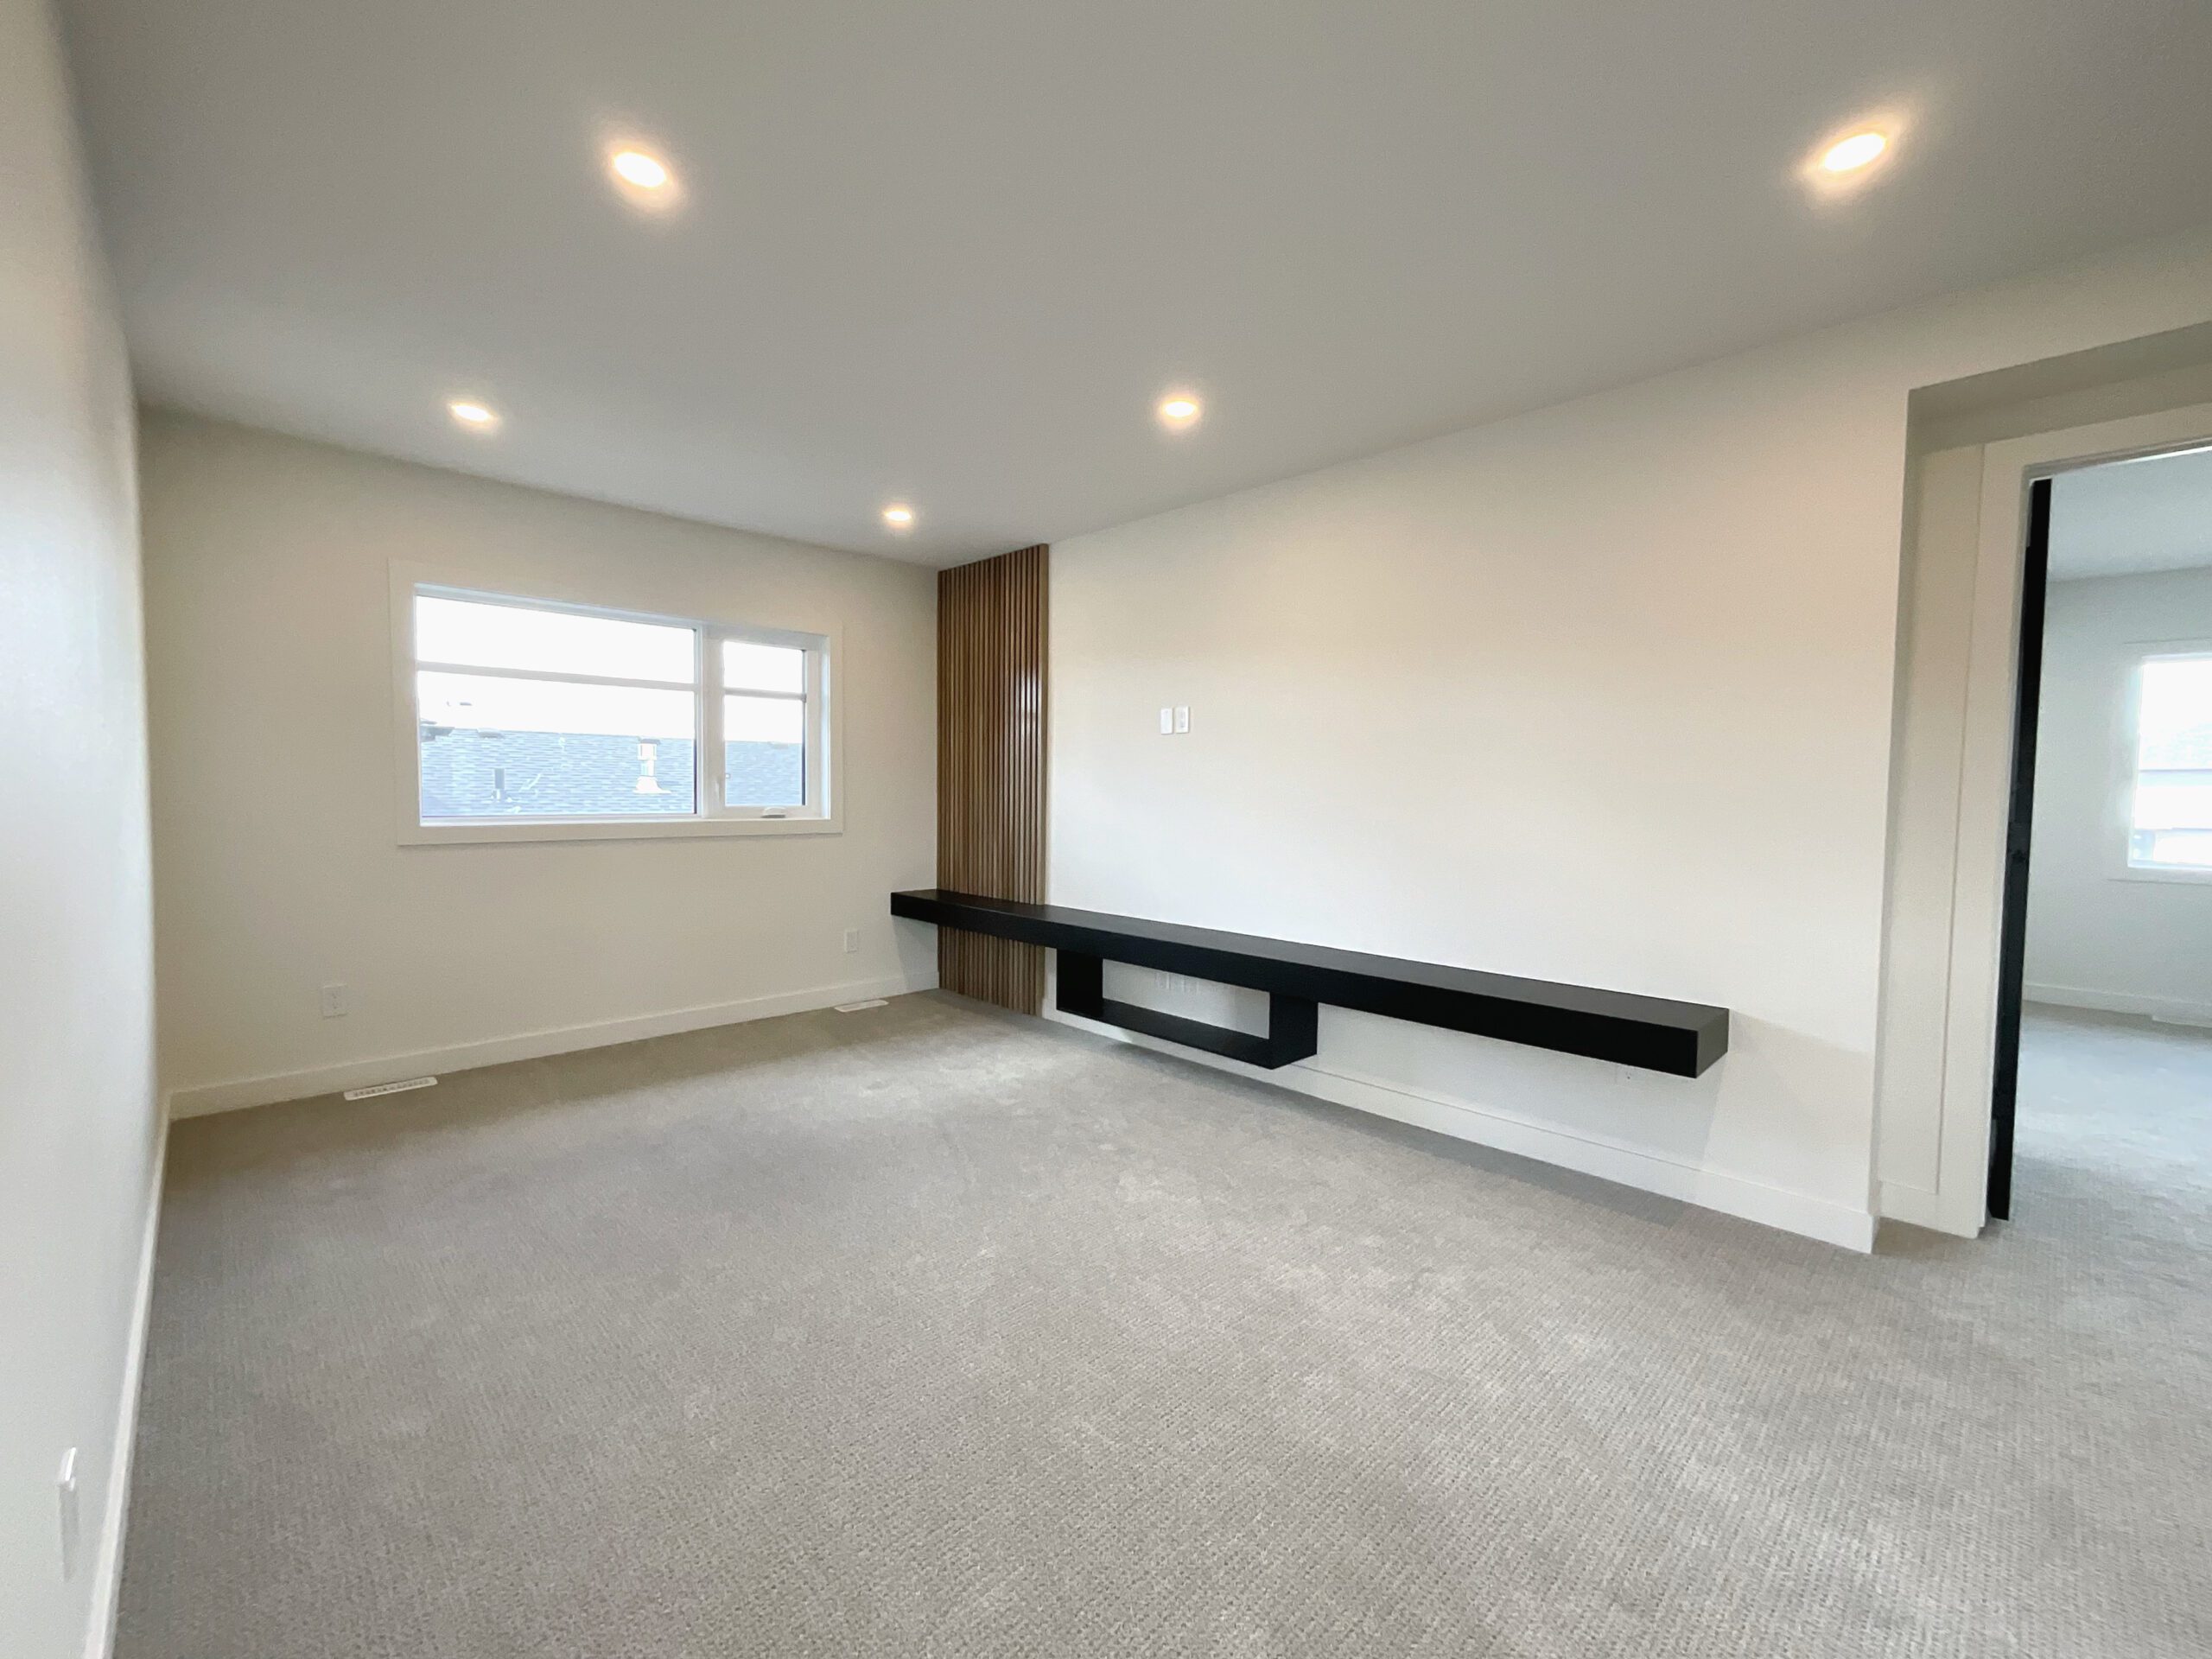 An empty bonus room with a built-in media console and decorative wood trim with carpet on the floor.